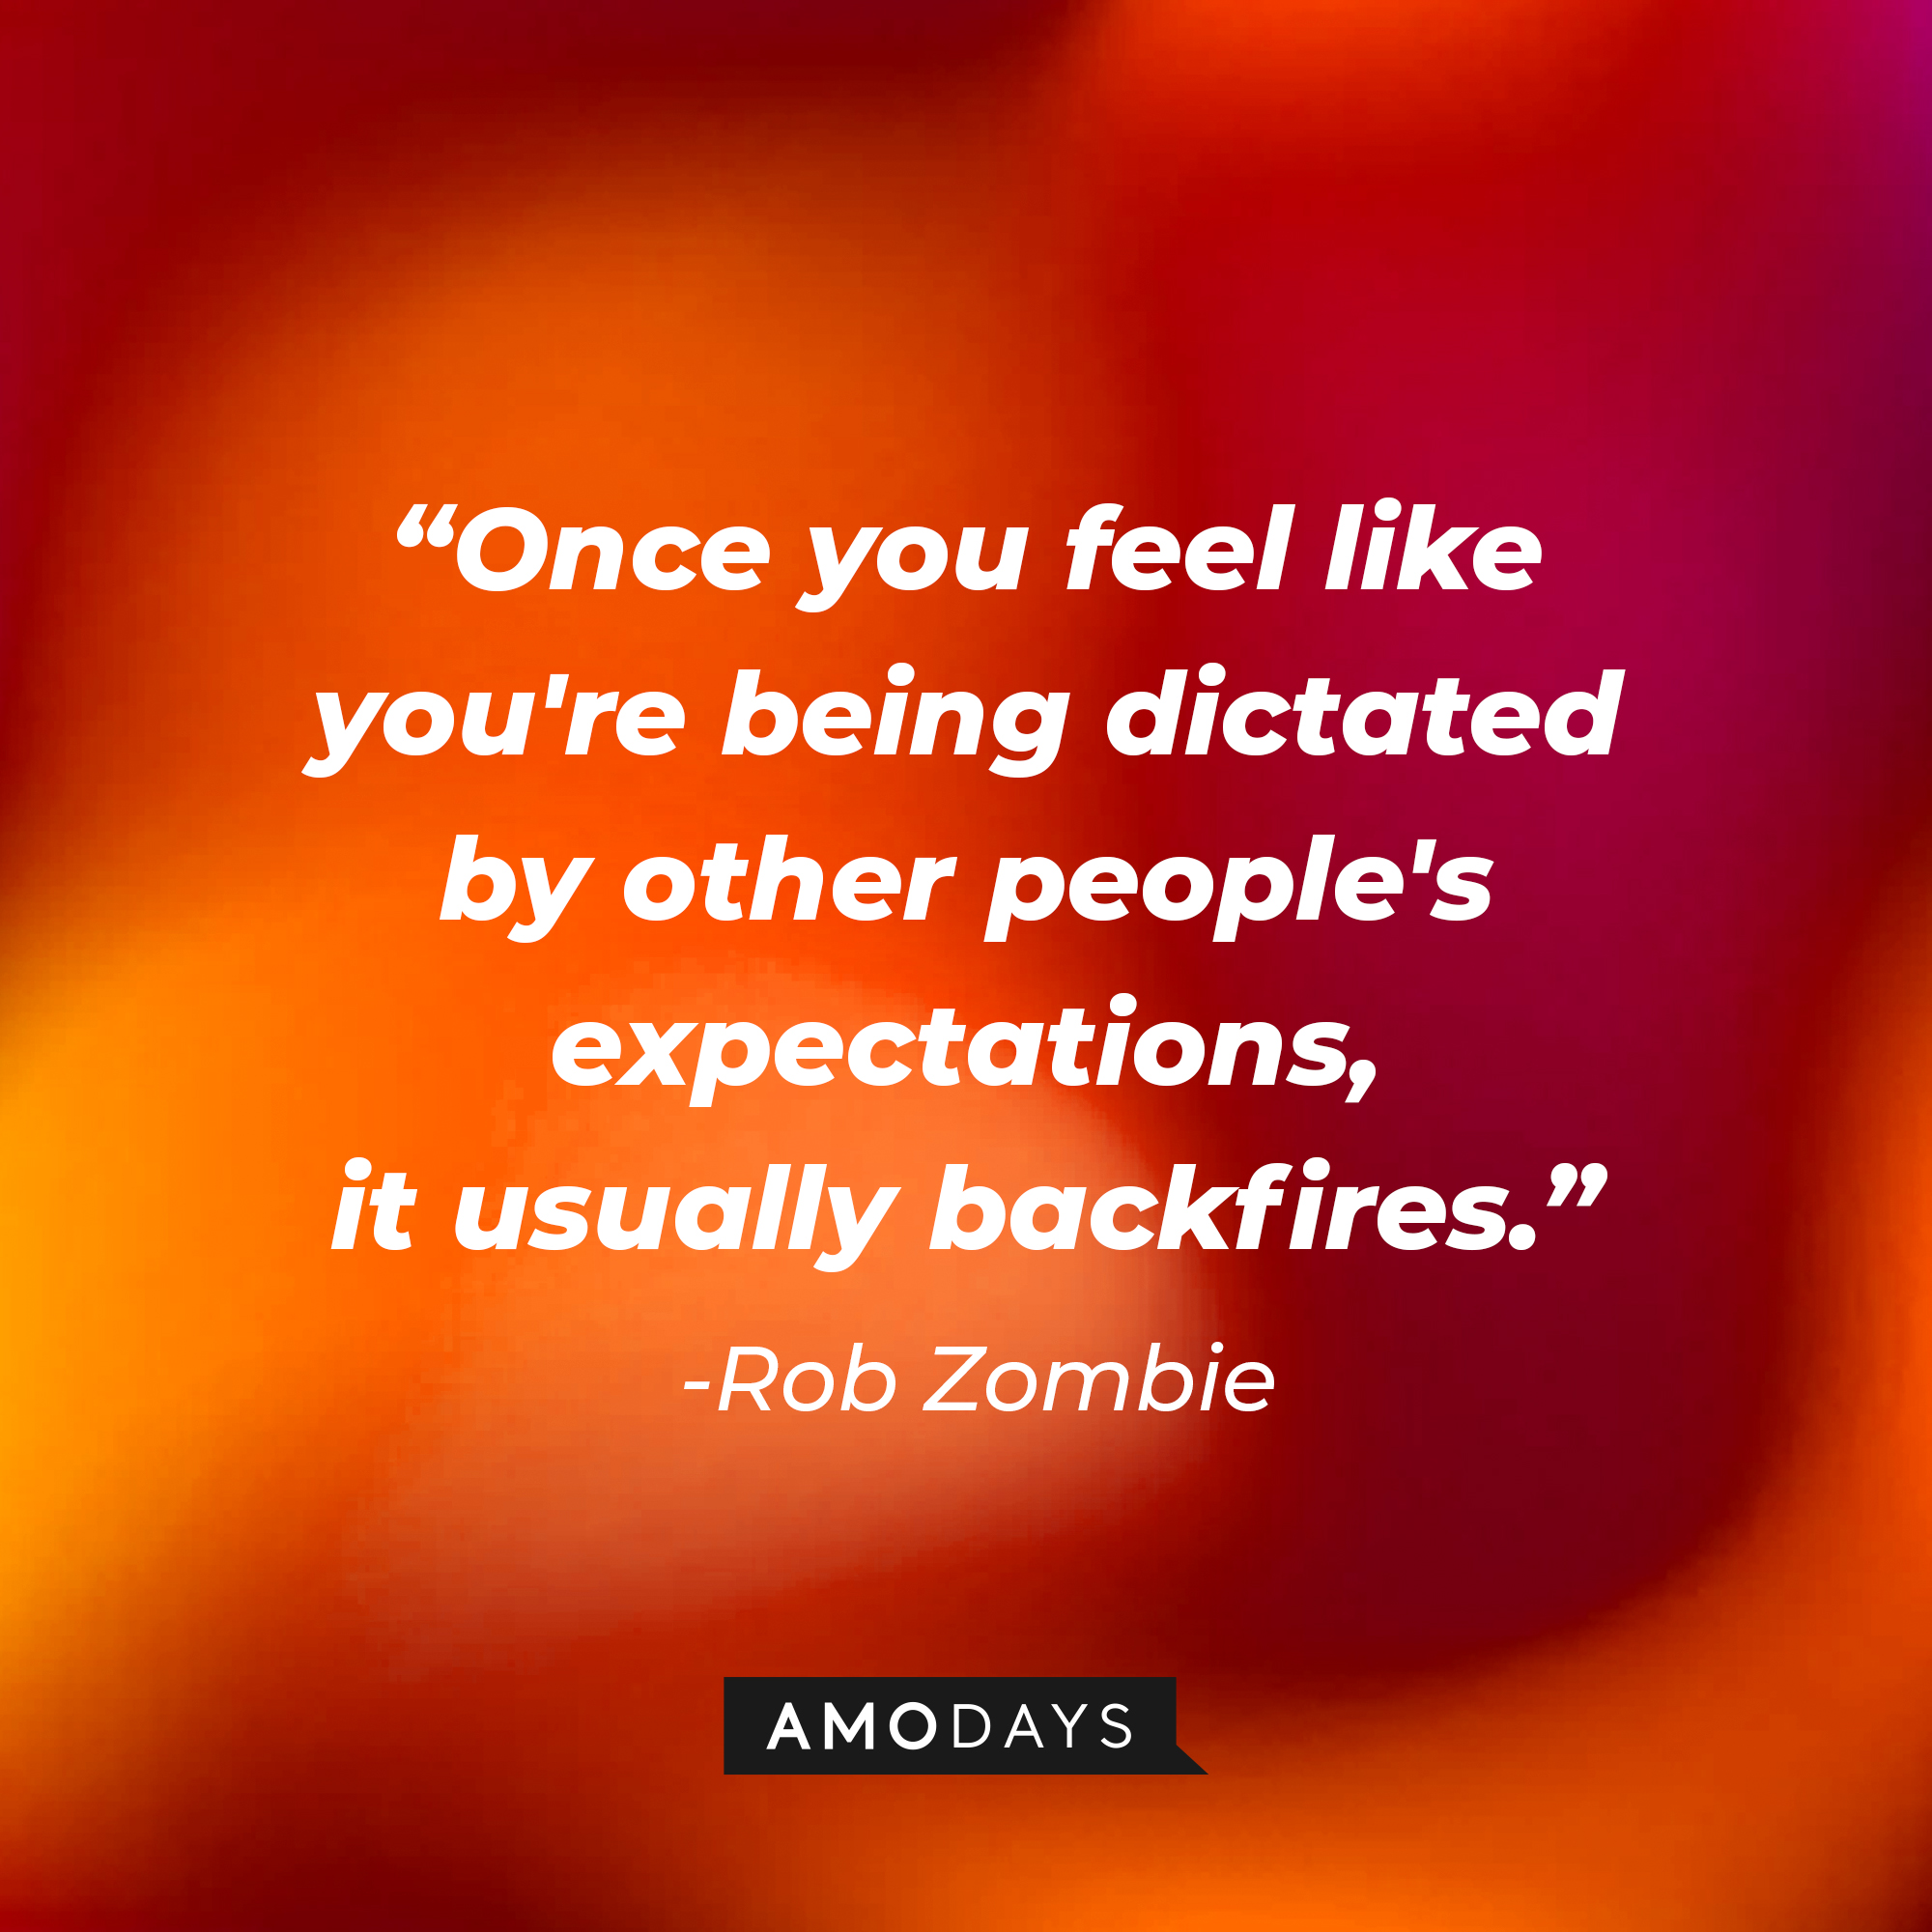 Rob Zombie's quote "Once you feel like you're being dictated by other people's expectations, it usually backfires." | Source: AmoDays